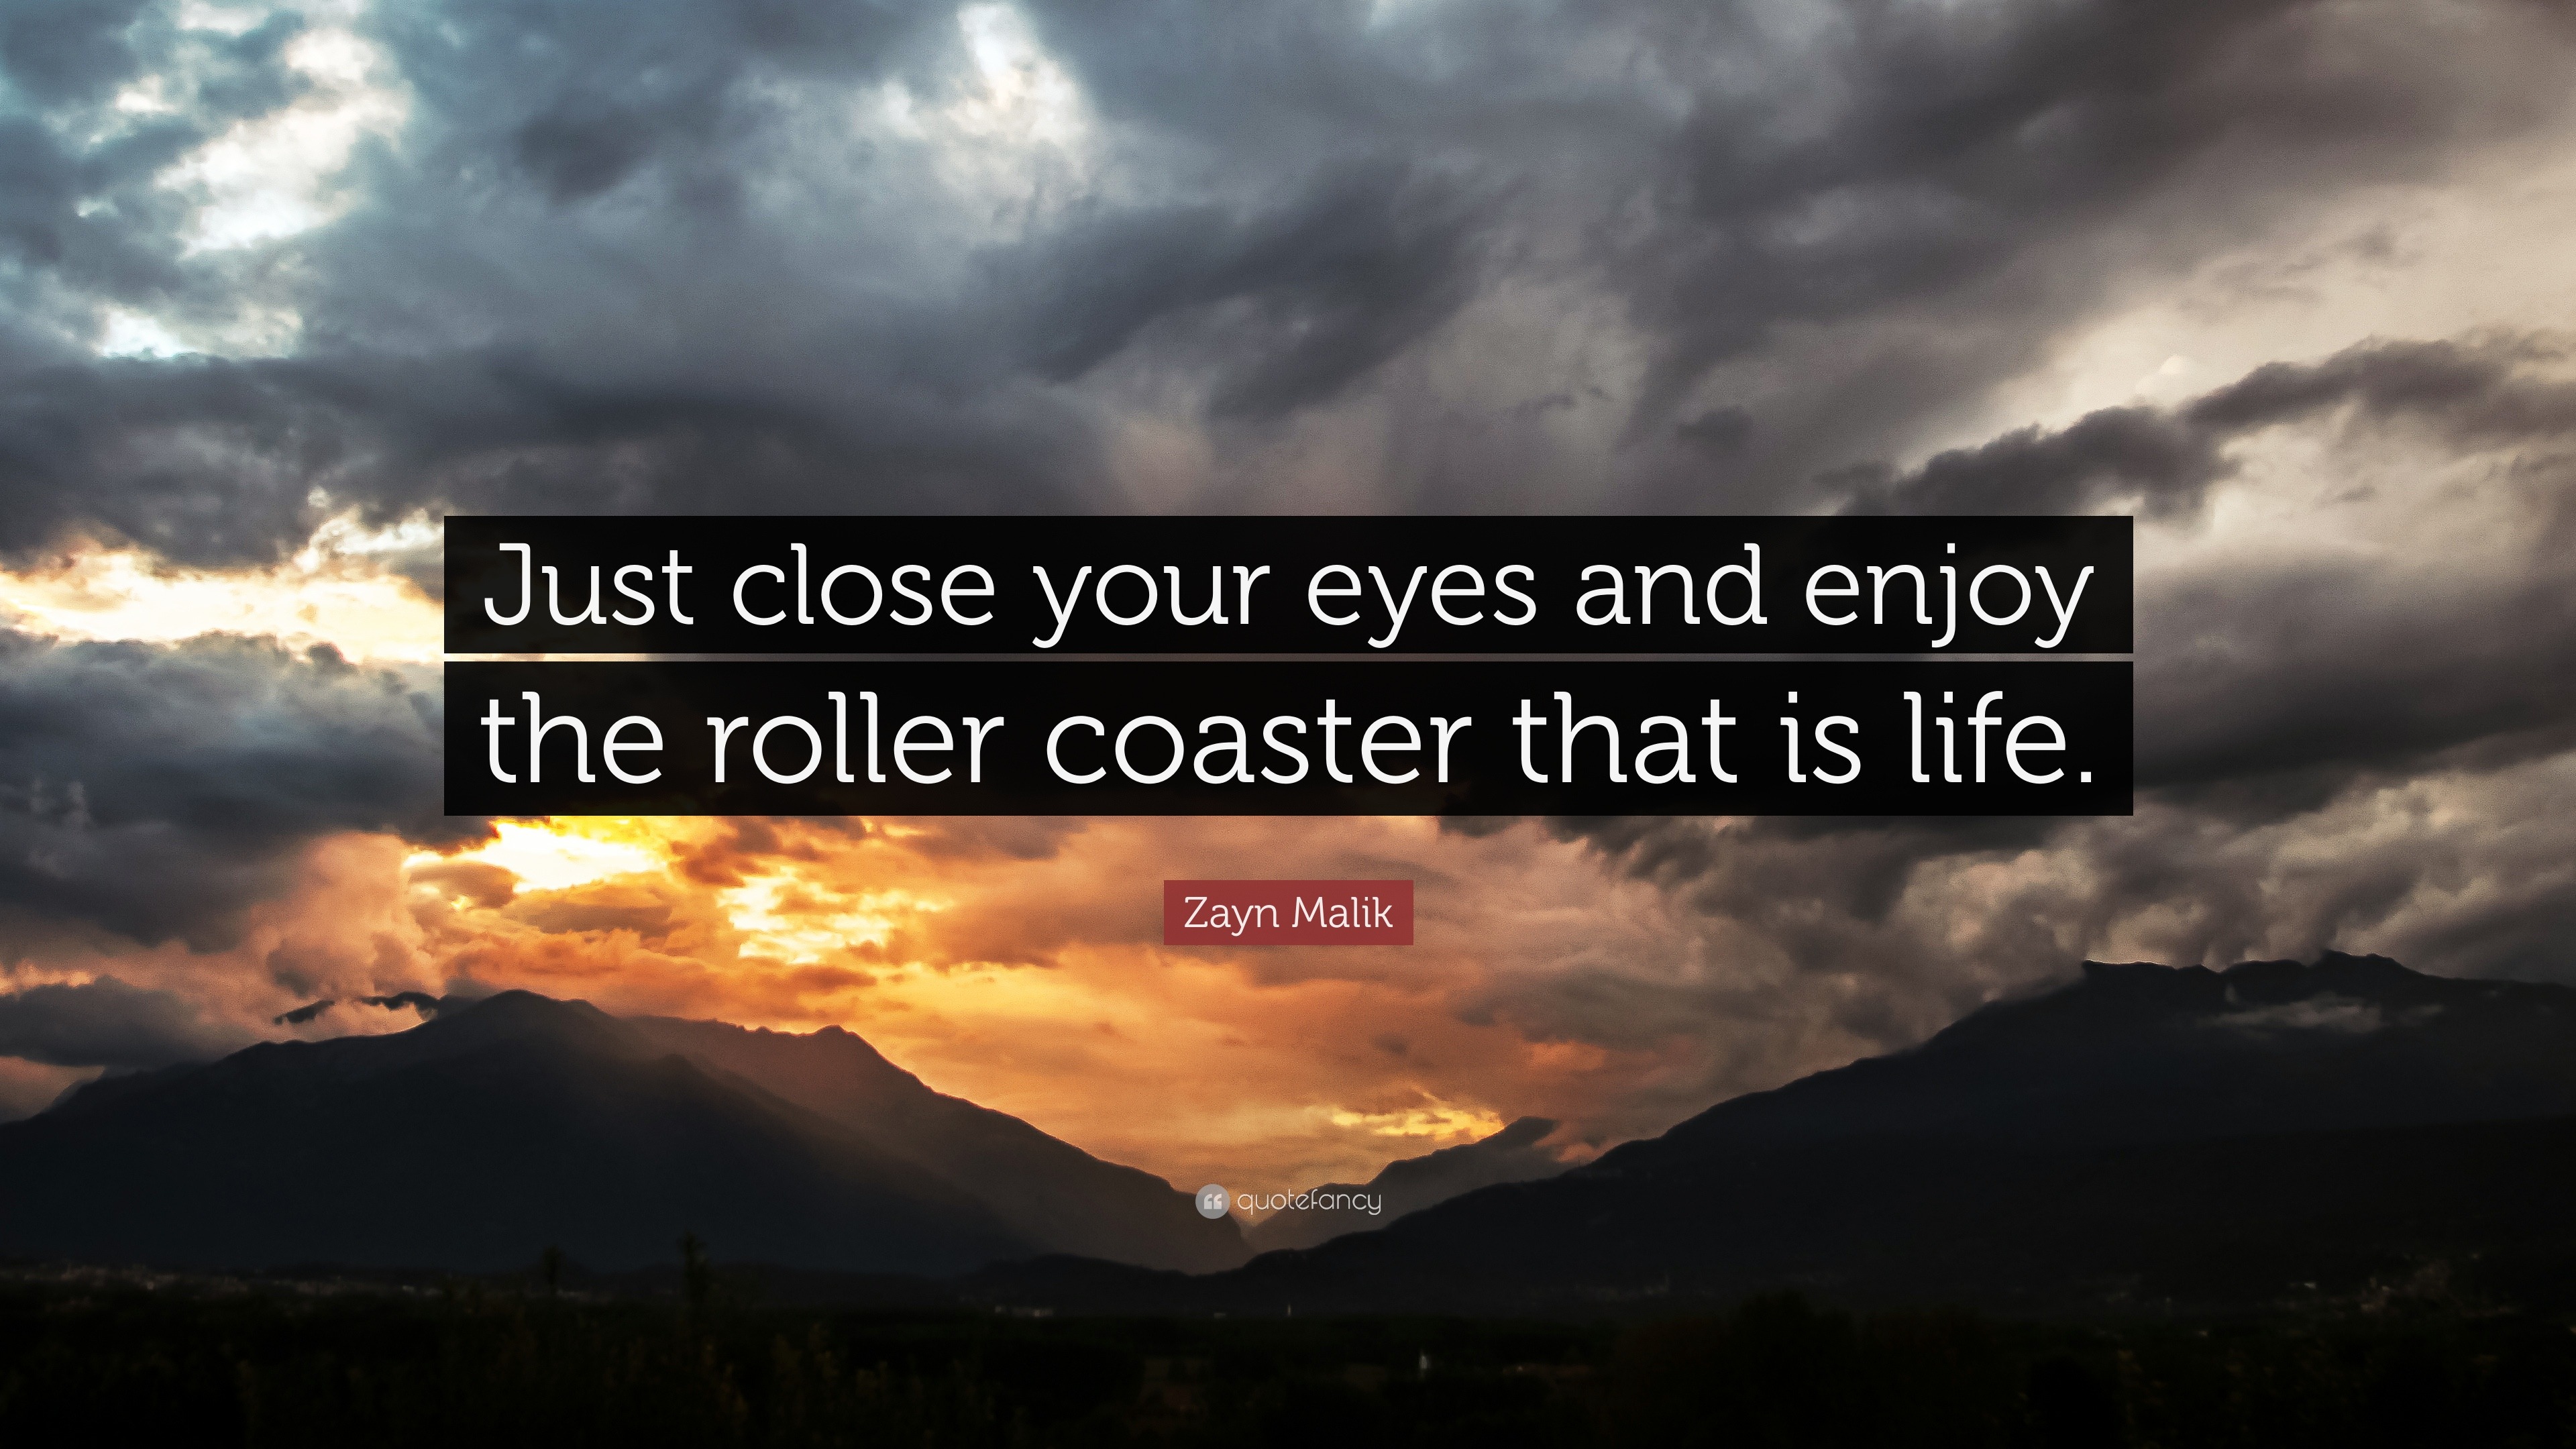 Zayn Malik Quote: "Just close your eyes and enjoy the ...